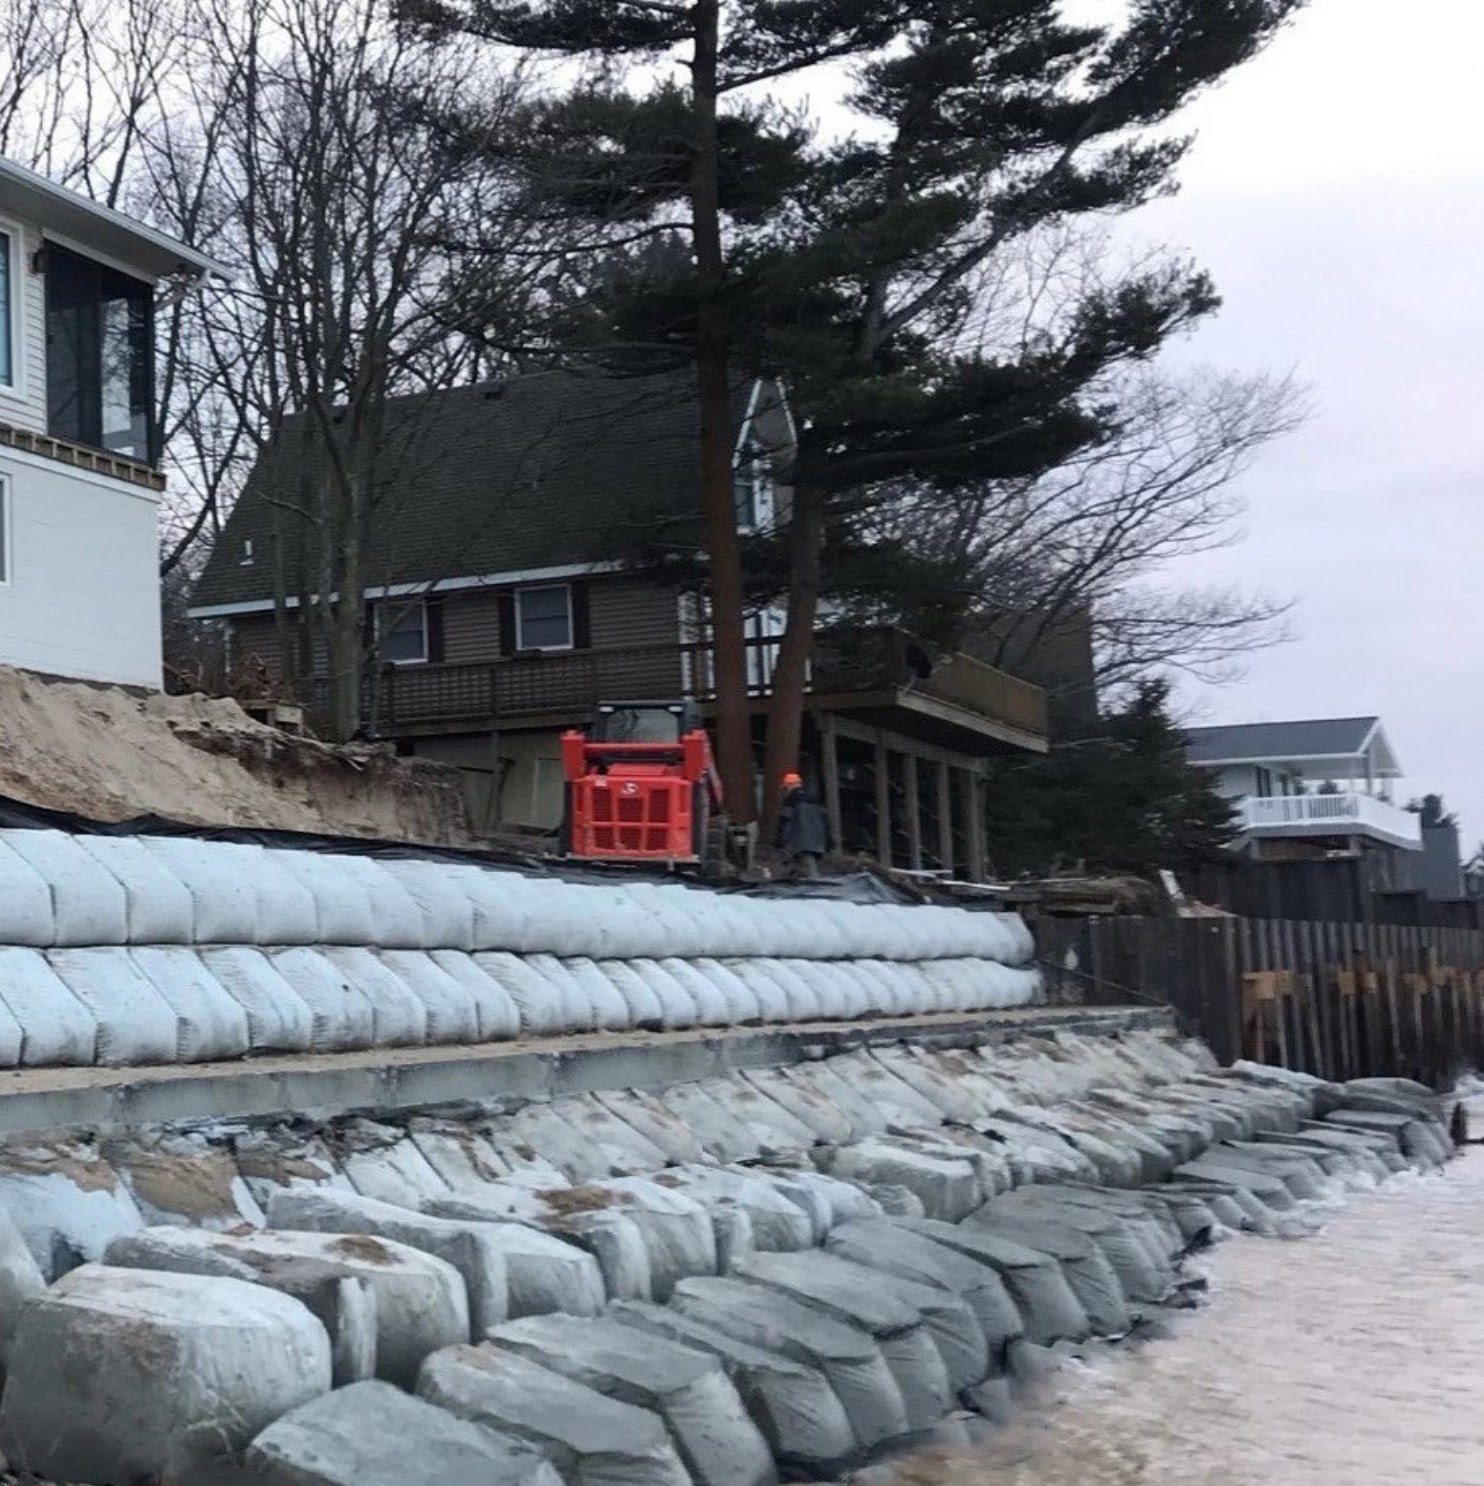 Retaining wall in front of homes